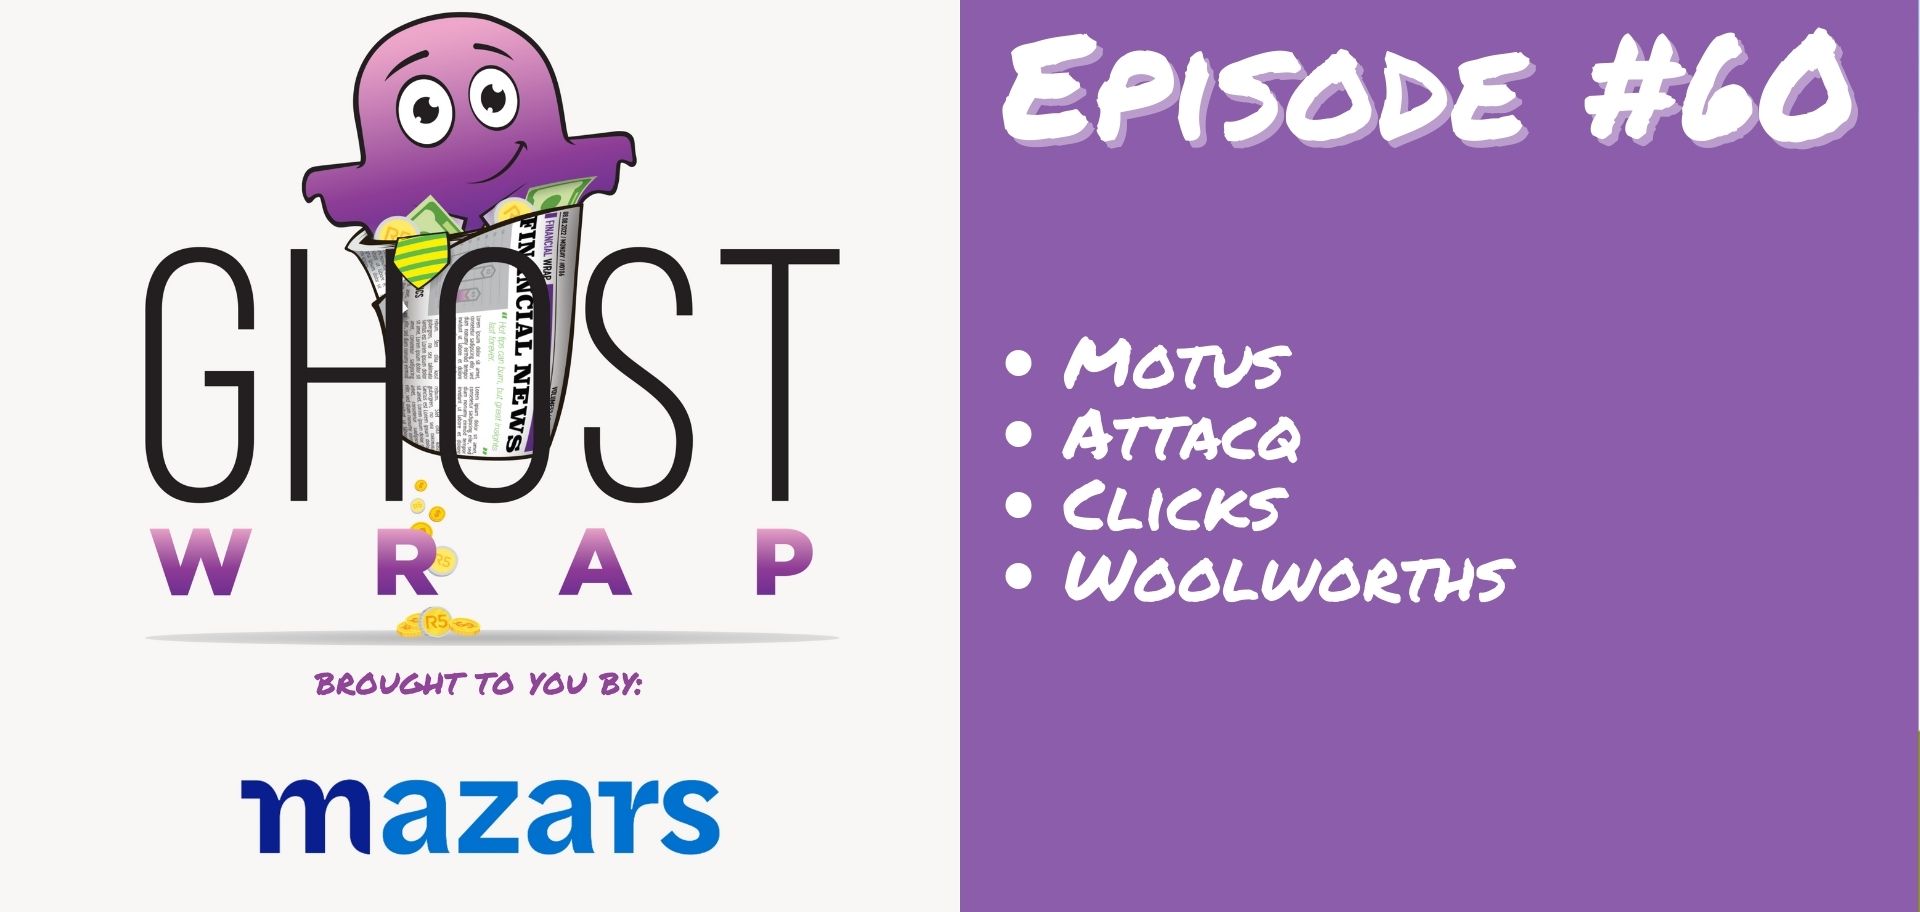 Ghost Wrap #60 (Motus | Attacq | Clicks | Woolworths)